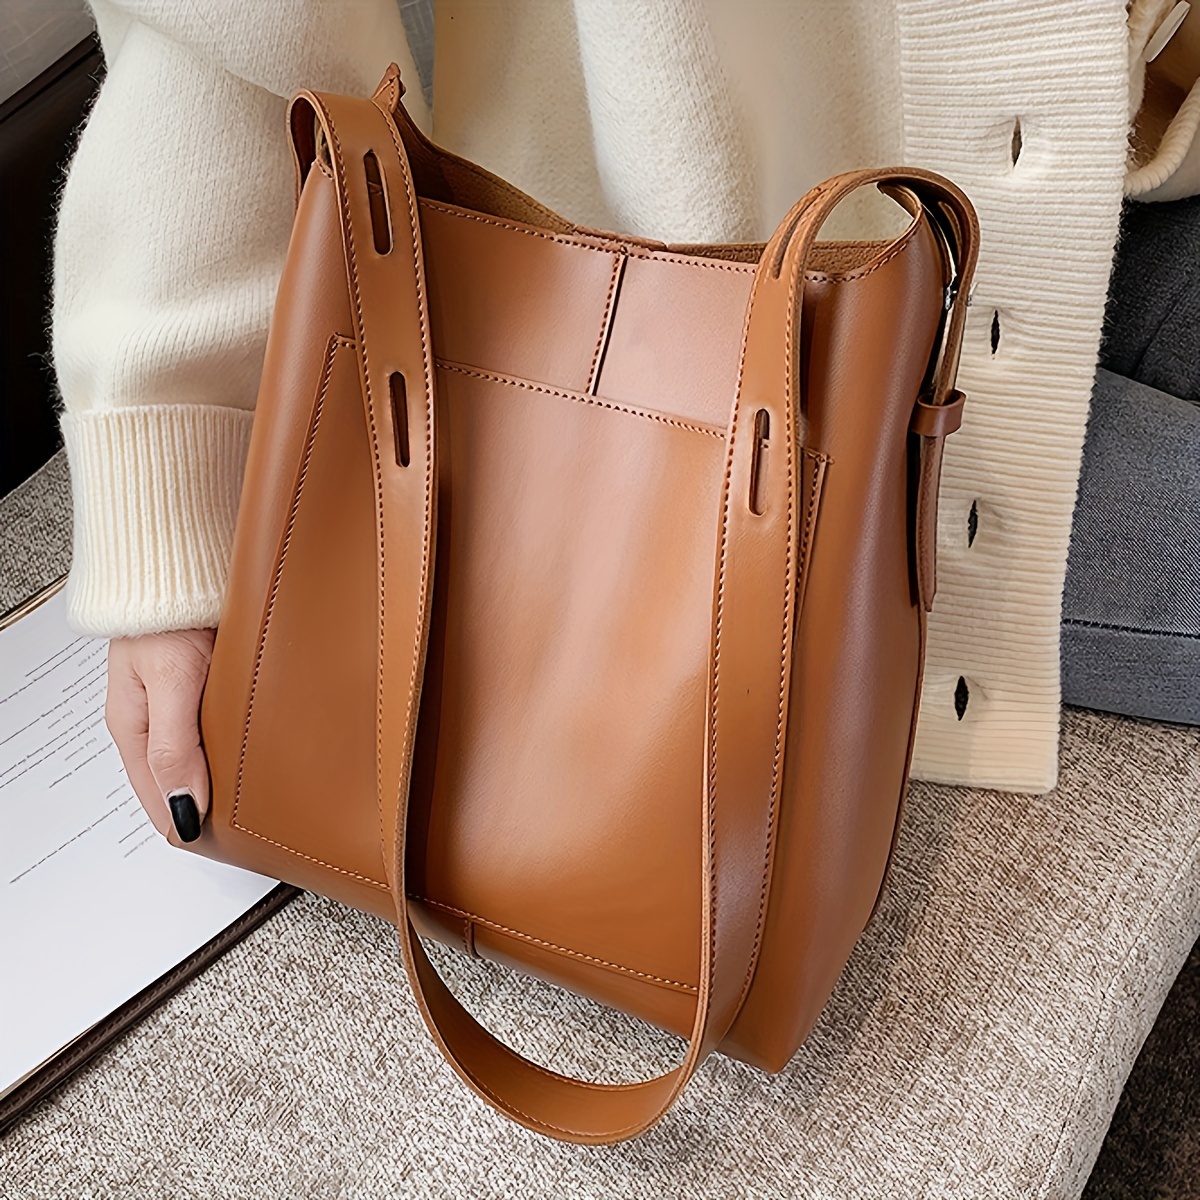 Slouch bag.Large TOTE leather bag in CAMEL brown with zipper